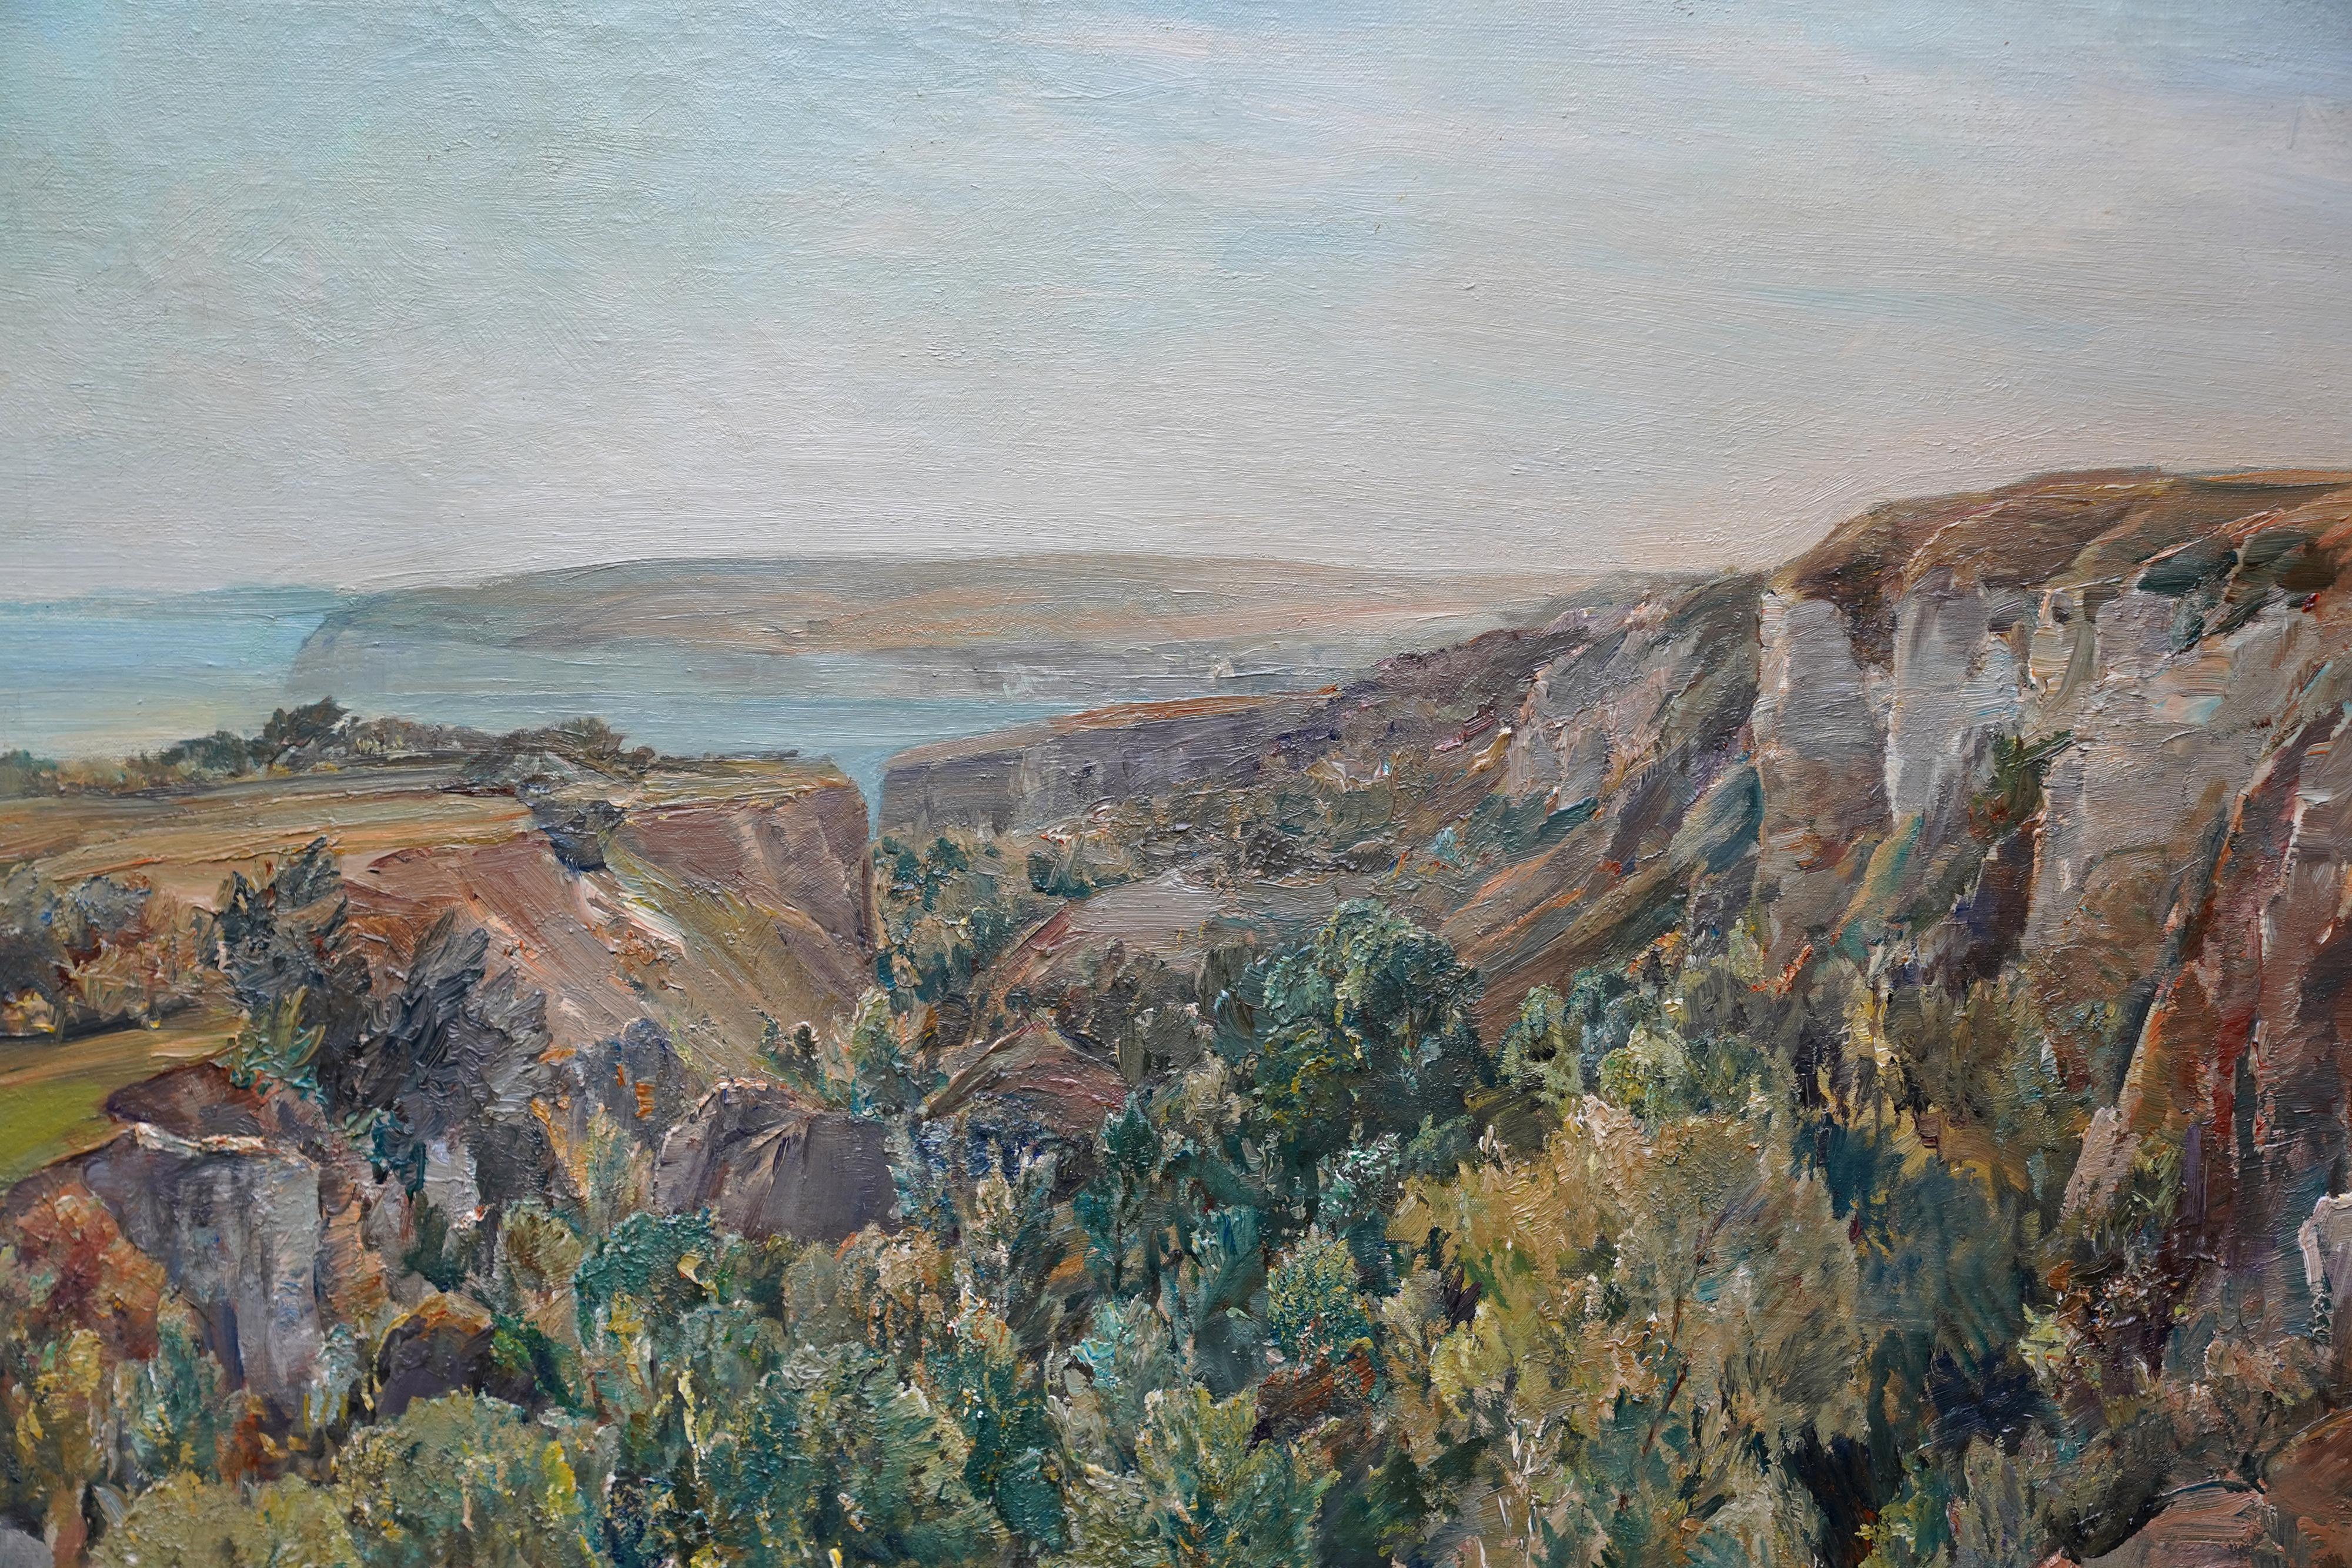 This lovely, exhibited landscape oil painting is by British New English Art Club female artist Evelyn Cheston. It was painted circa 1920 when Cheston was resident in Devon. The view is a coastal landslip landscape. The painting has a wonderful